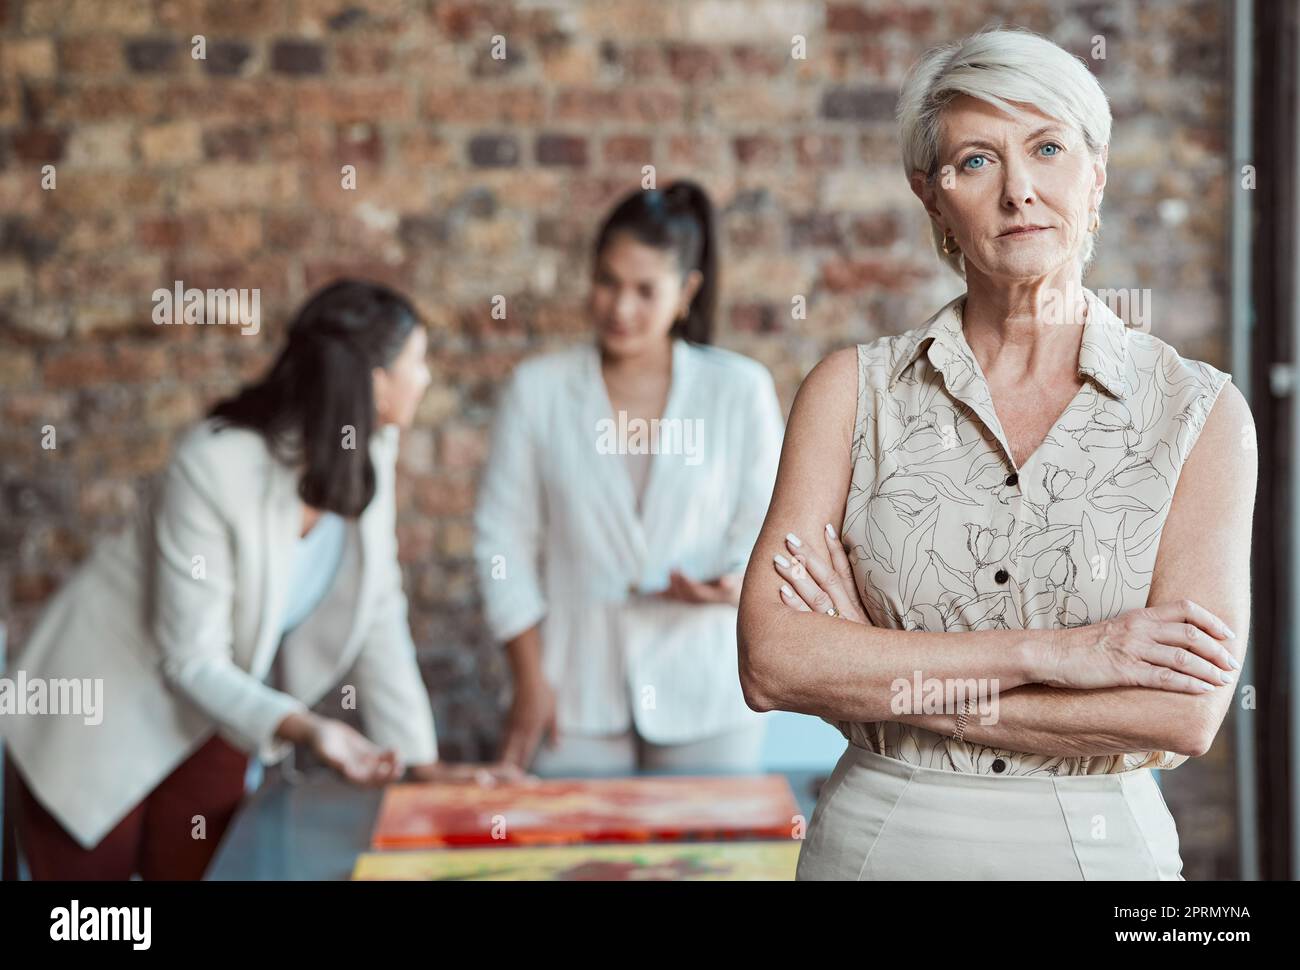 Elderly woman, art gallery manager and exhibition room working talking. Interior design business, review paintings and project teamwork. Serious buyer talking, museum collection and creative critic Stock Photo